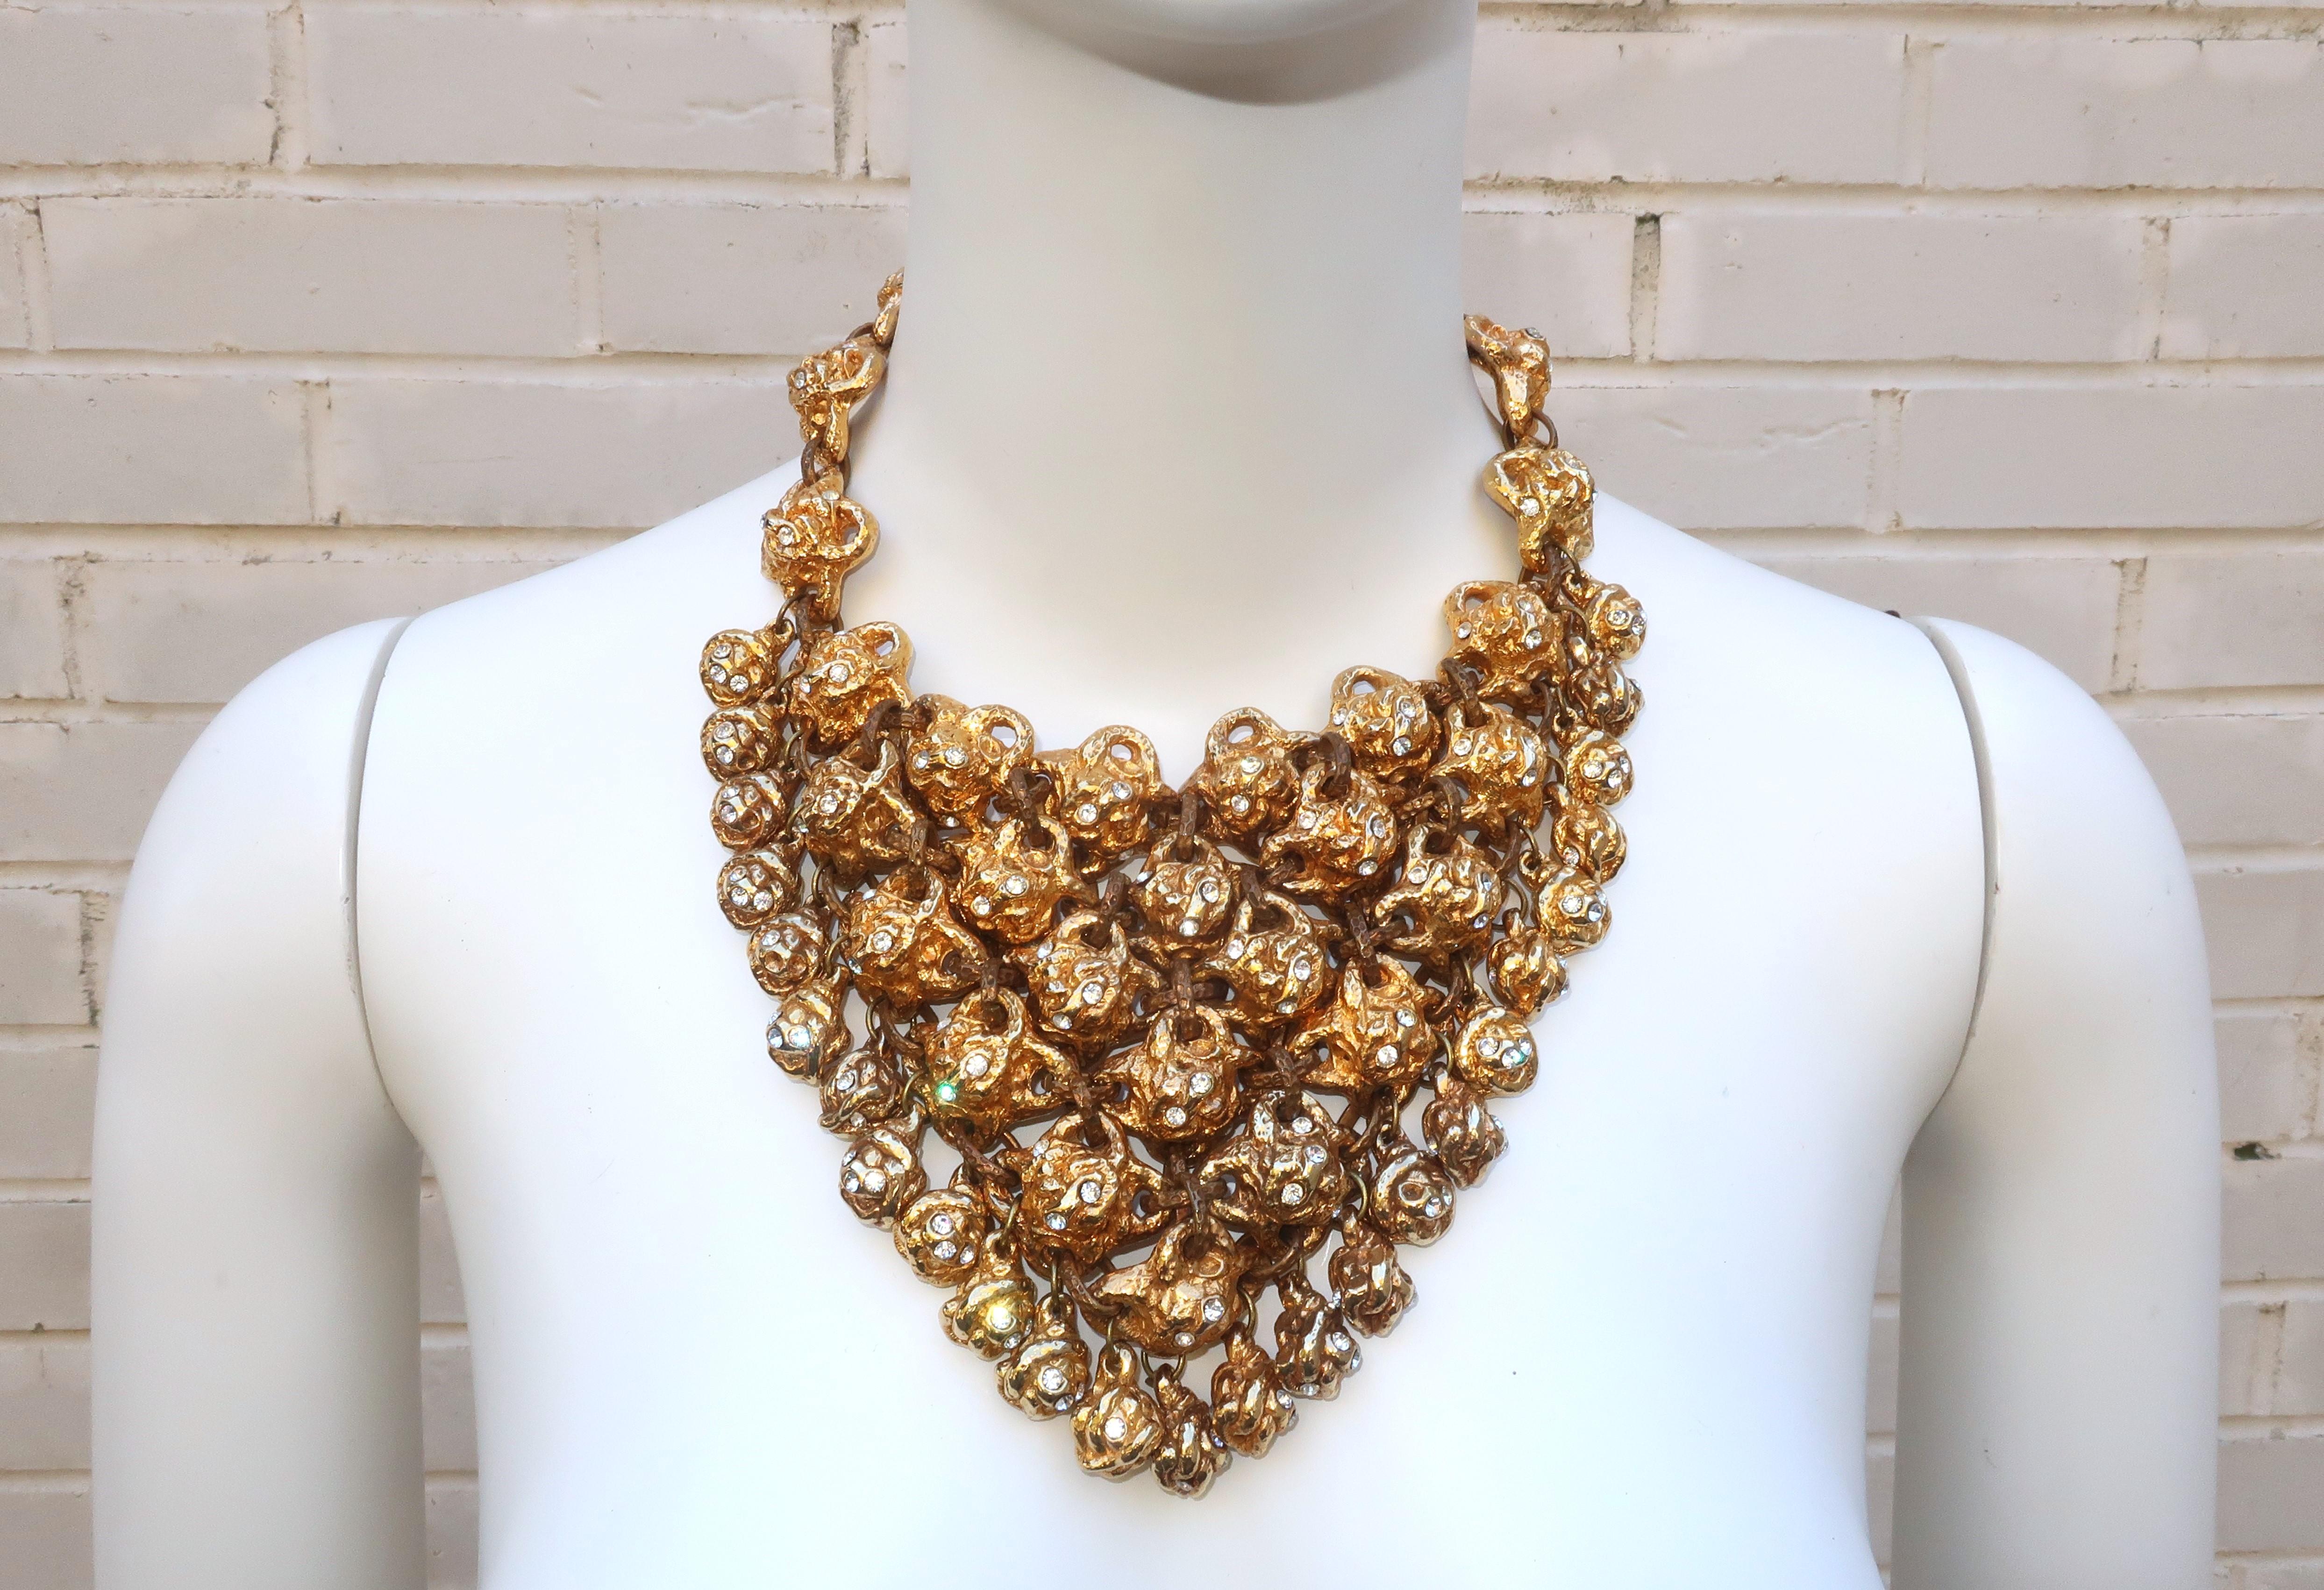 Fabulous 1980’s Alexis Lahellac brutalist bib necklace with the statement making look of chunky gold nuggets accented by sparkling crystal rhinestones.  The necklace is created by linking rows of nugget-like gold tone metal alloy charms with